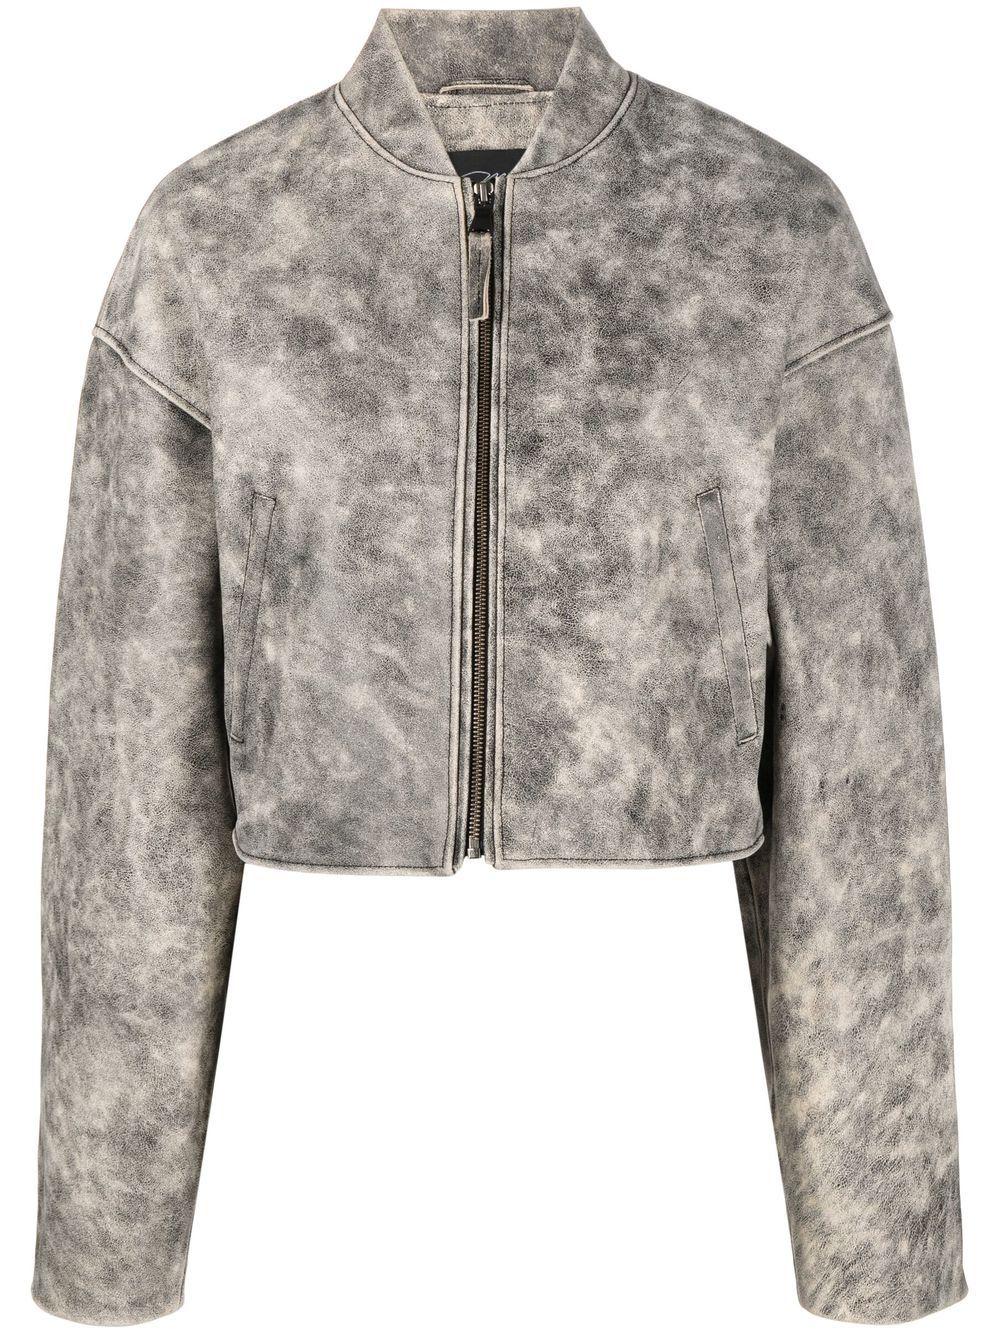 Manokhi Cropped Leather Bomber Jacket in Gray | Lyst